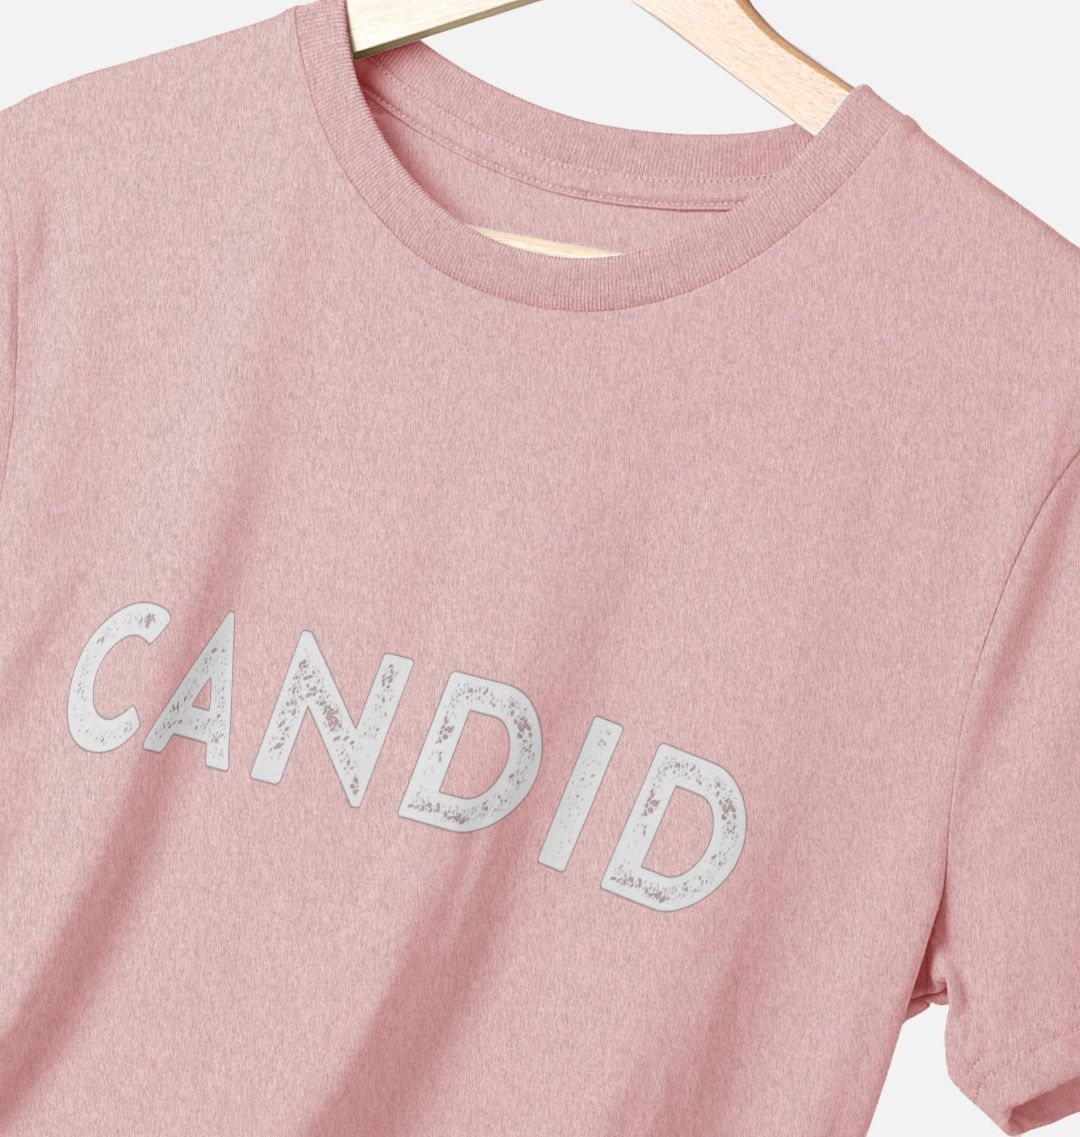 Candid Remill T-Shirt